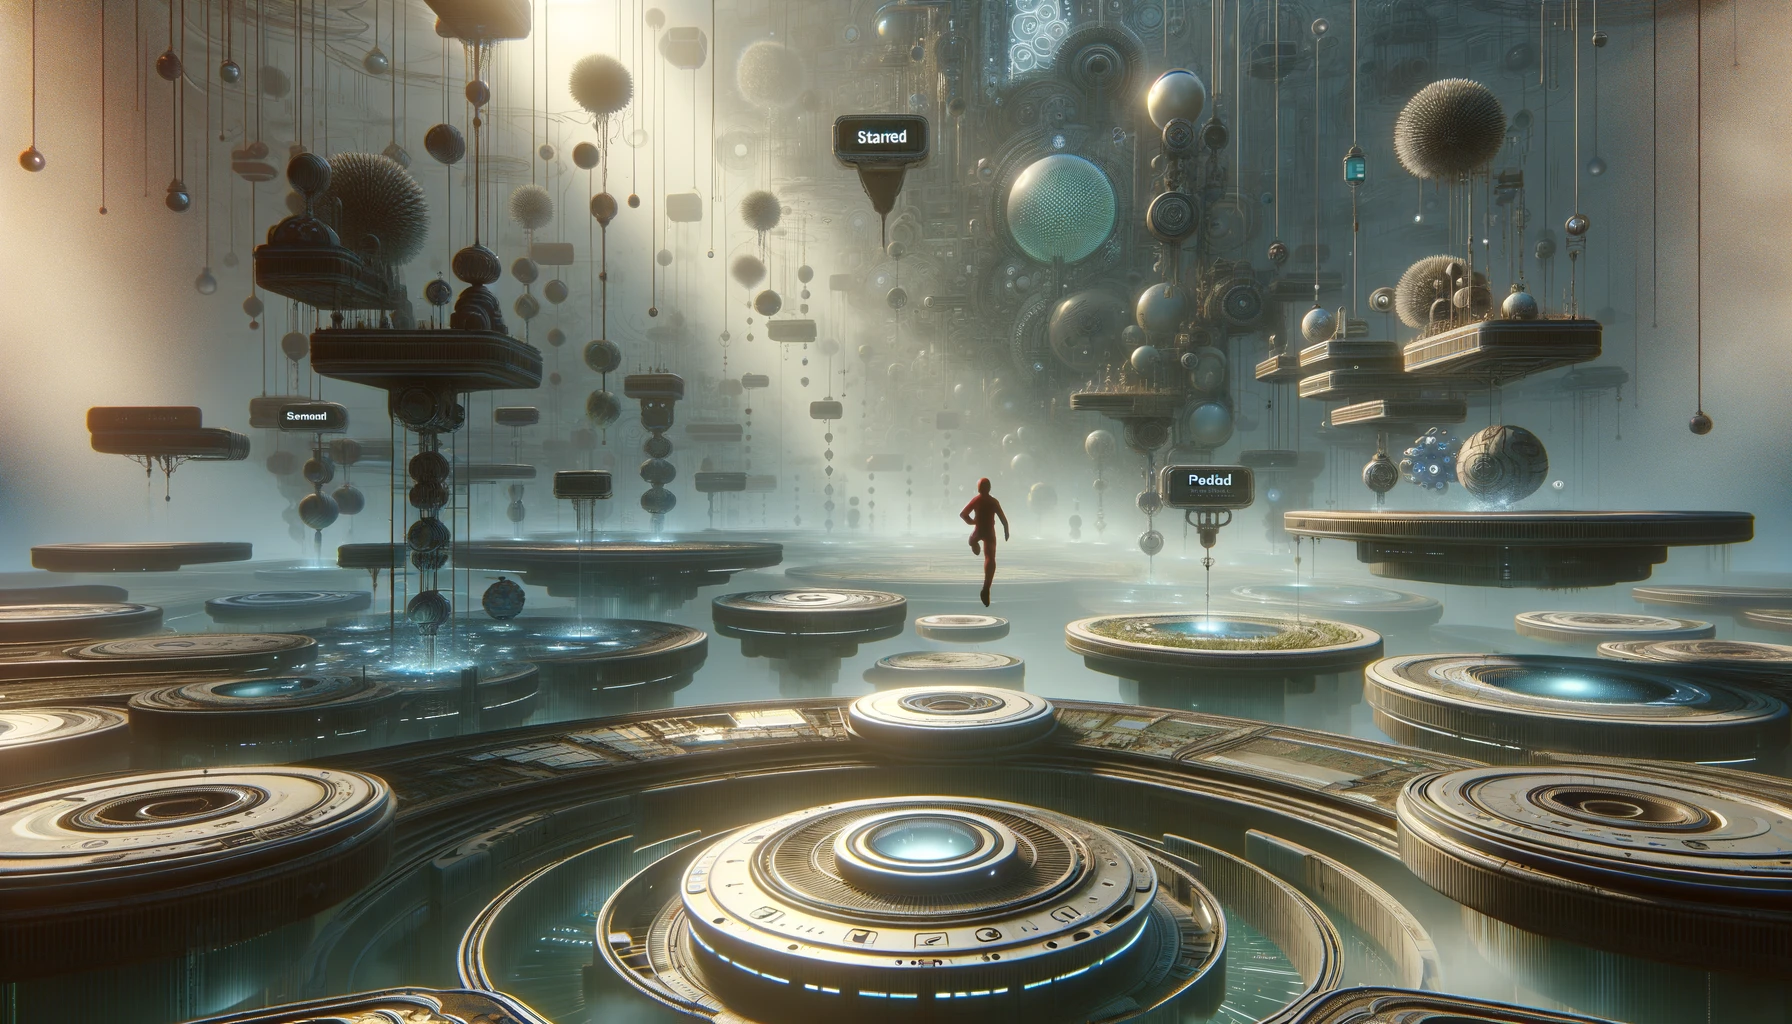 In a mysterious space, platforms float at different heights. The main character leaps from a platform labeled 'Started' to 'Pool 1', surrounded by strange objects and secondary characters in a detailed, fantastical setting.